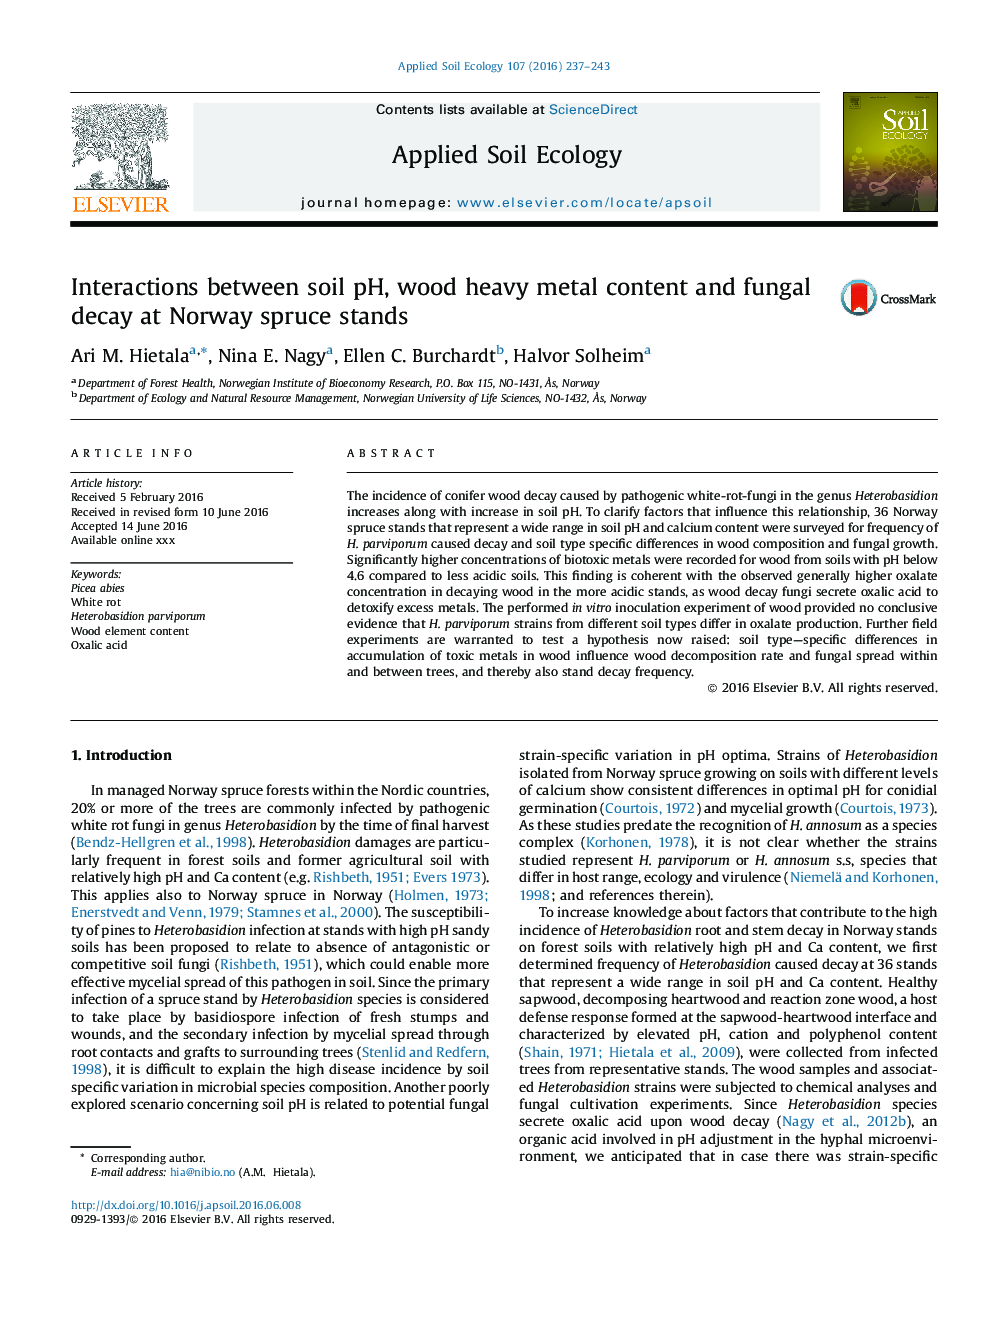 Interactions between soil pH, wood heavy metal content and fungal decay at Norway spruce stands